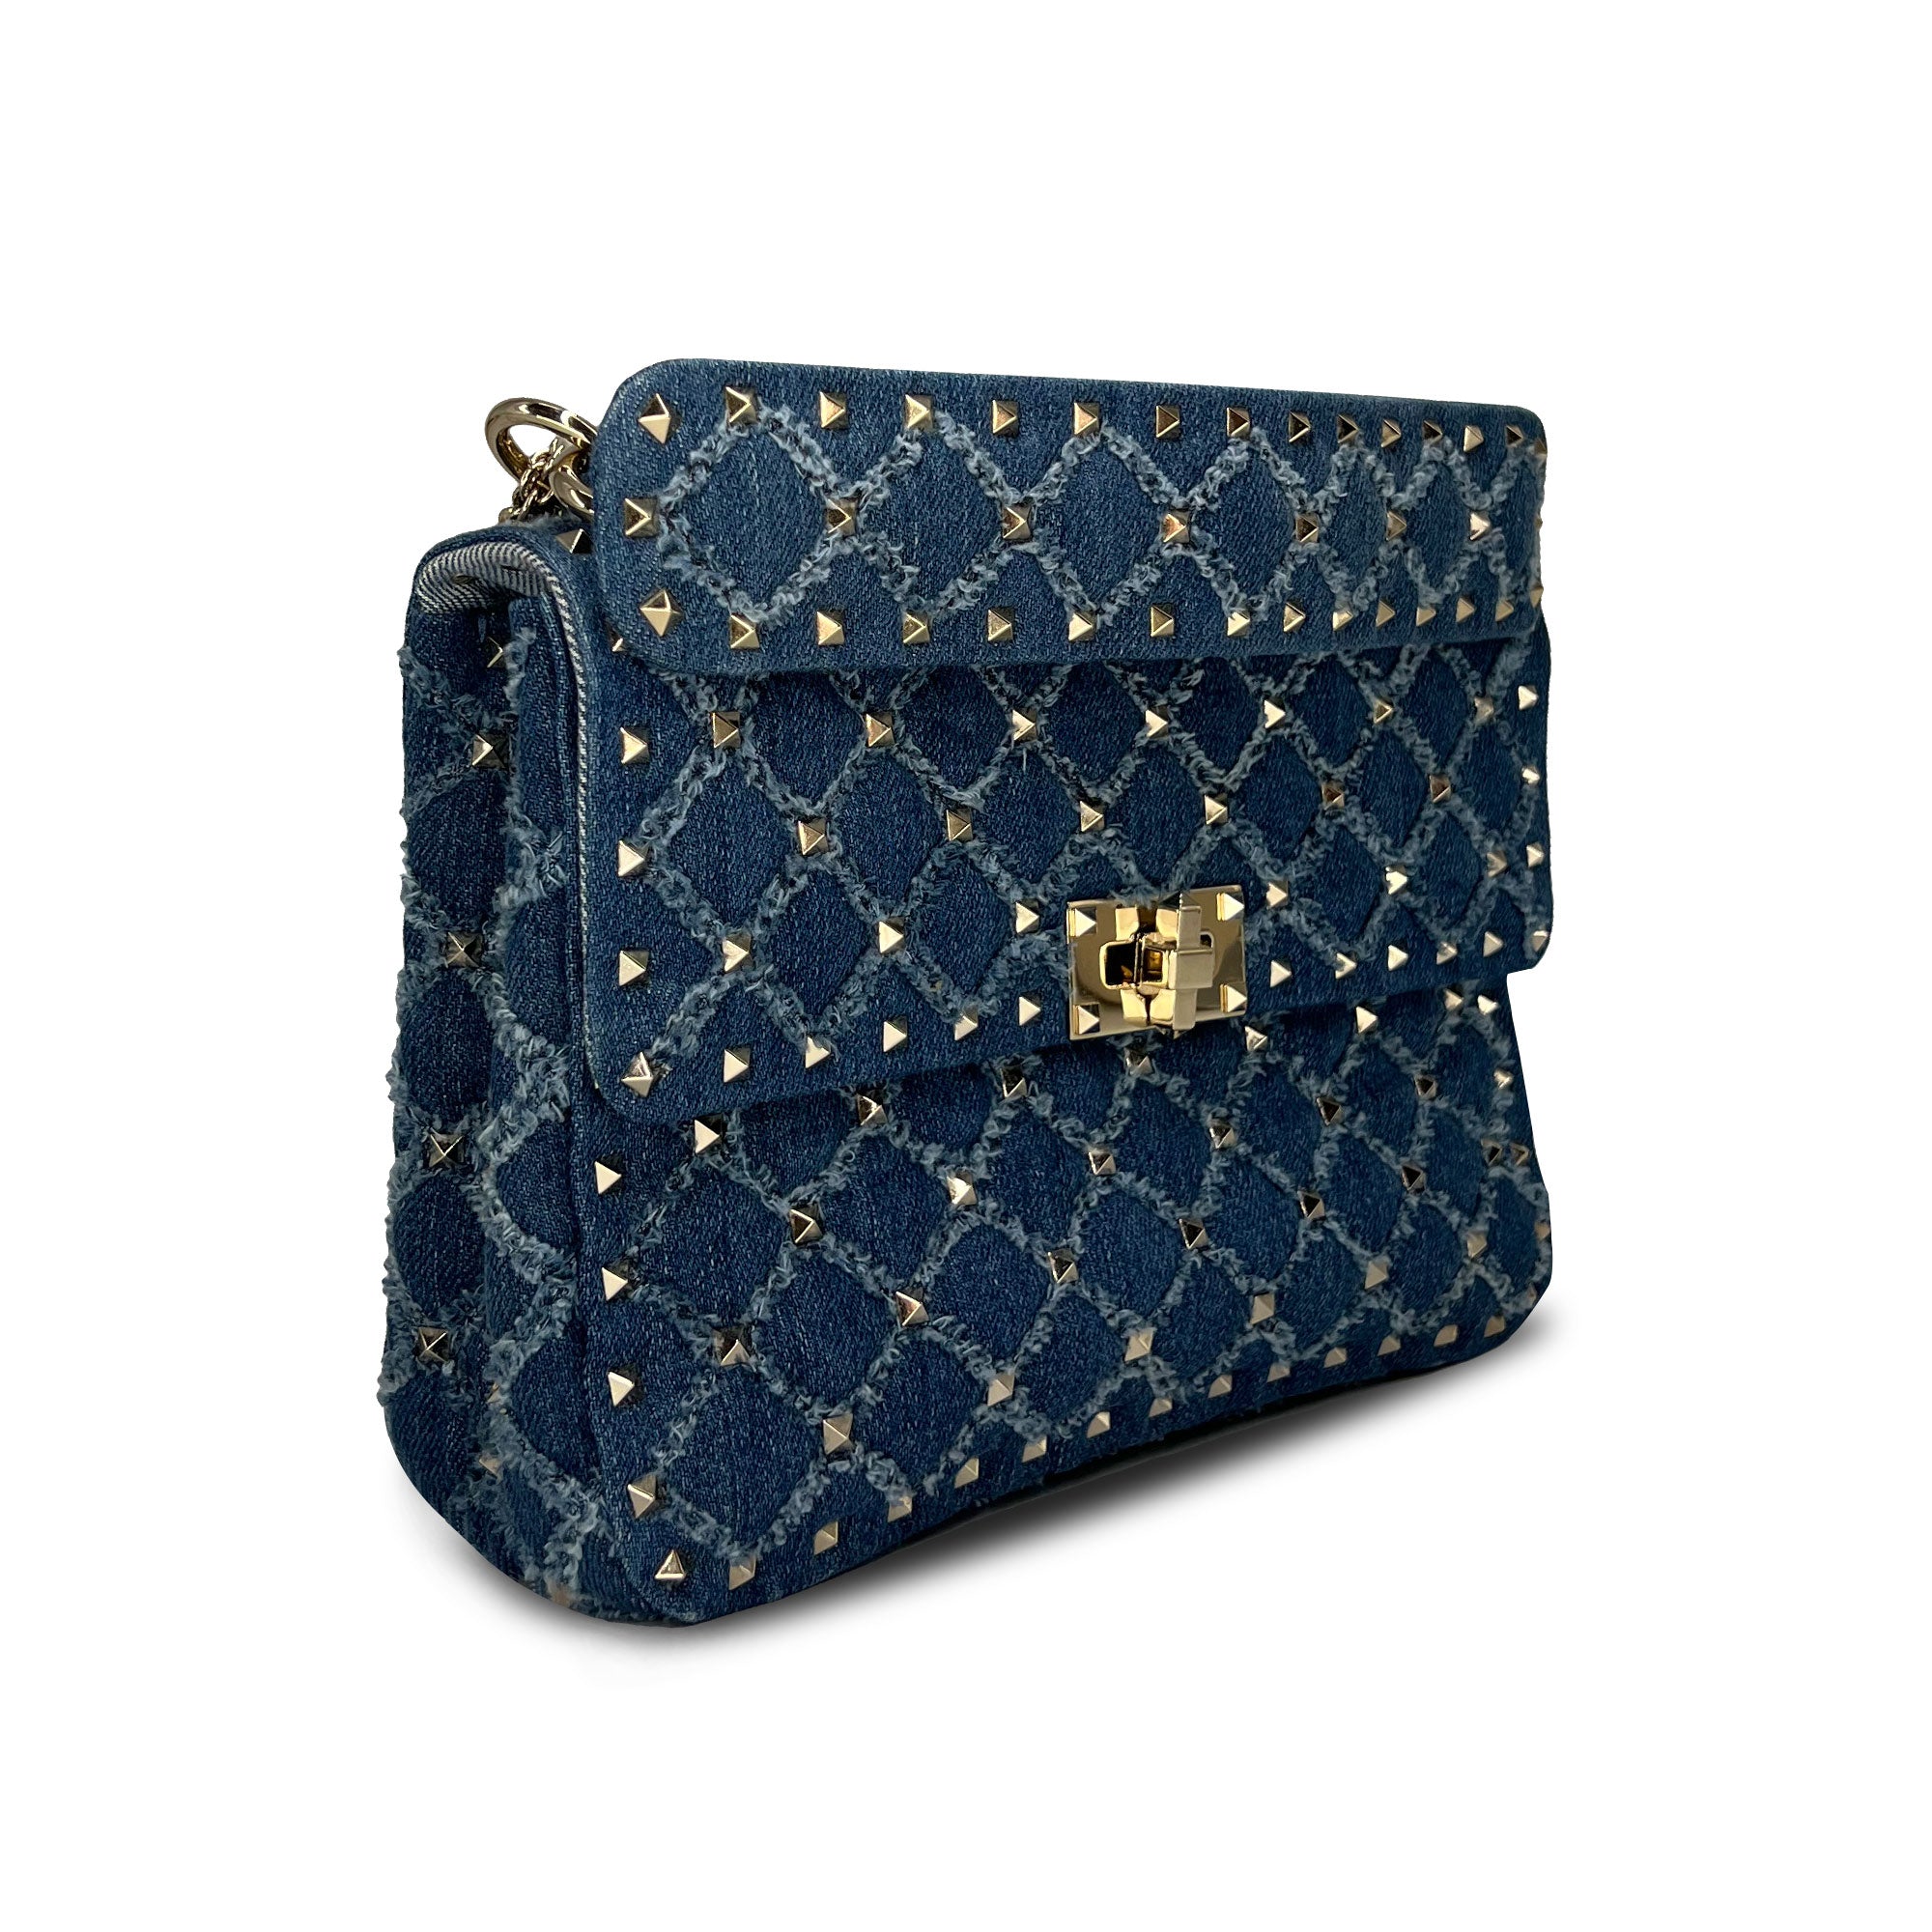 A Closer Look: Valentino Rockstud Spike Quilted Bag